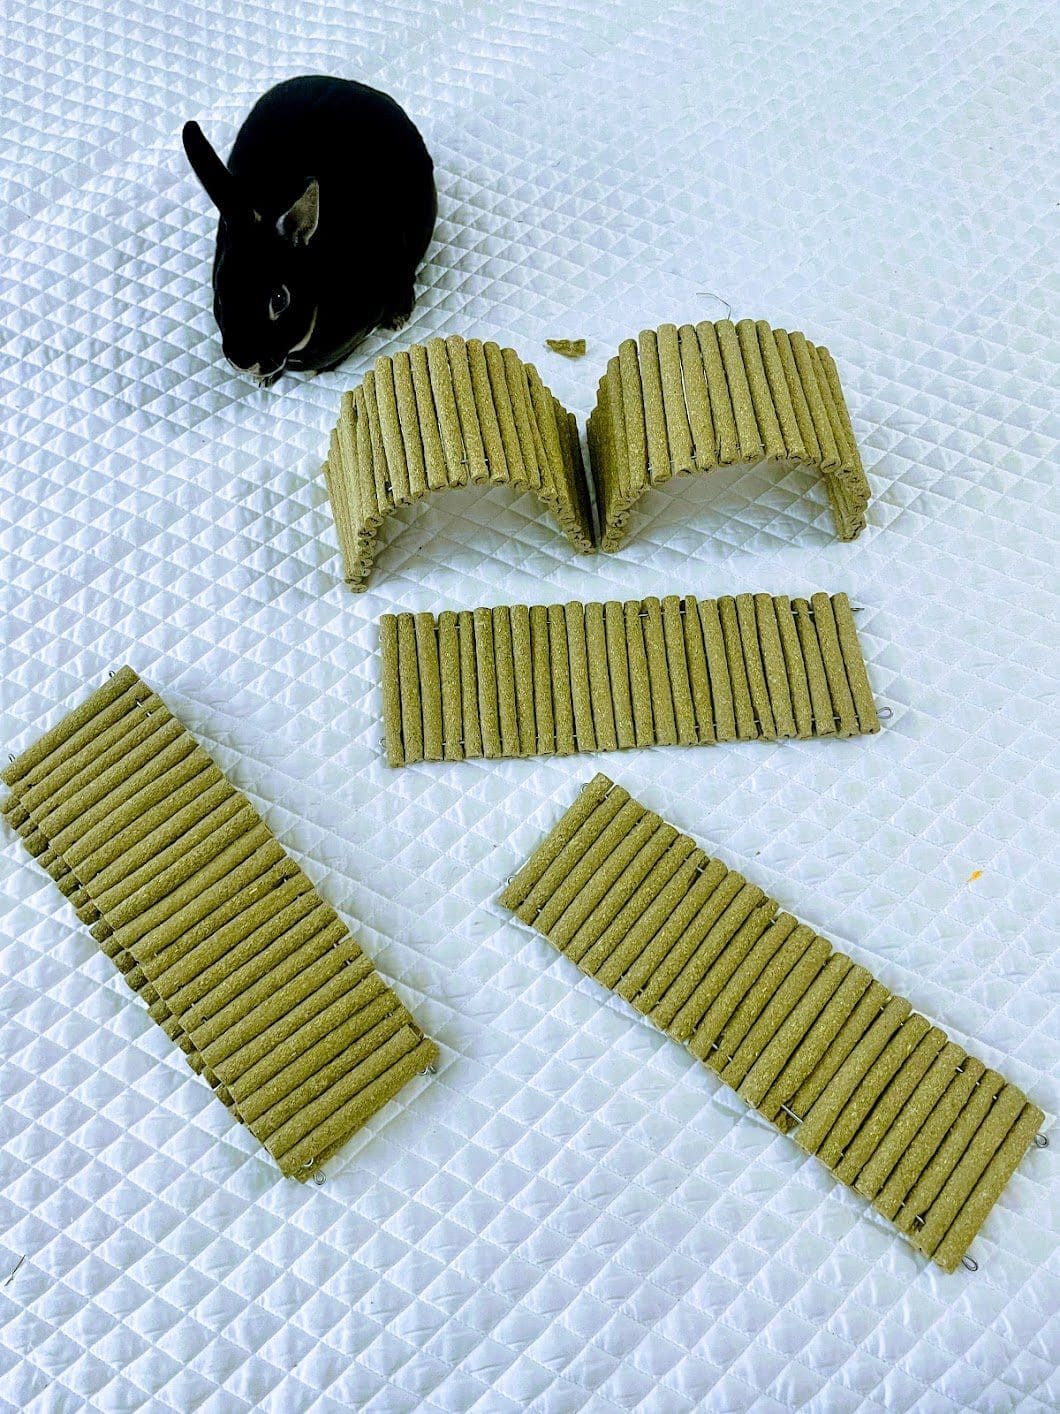 Hay Bendable Bridge Treat and Chew Toy For Rabbits, Hamsters, Guinea Pigs, Chinchillas and Small Rodents.